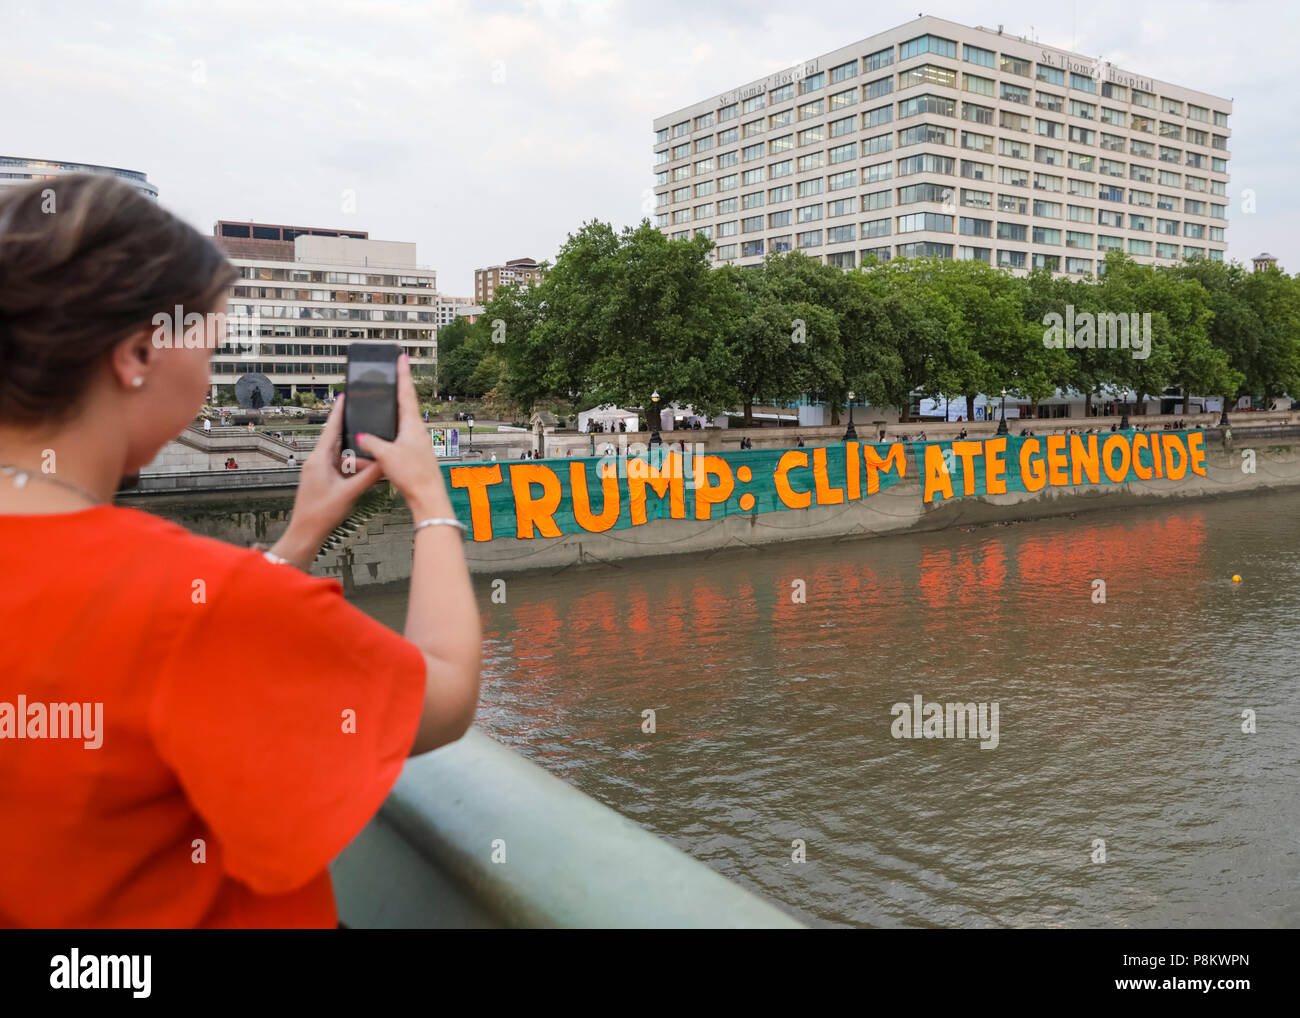 Westminster, London, 12th July 2018. Campaigners against climate change protest over Donald Trump's visit by dropping a giant banner reading 'Trump: Climate Genocide' at St Thomas’ Hospital Gardens, opposite the Houses of Parliament in Westminster. The huge banner, 100 metres x 9 metres large, is to raise awareness about the US president's climate policies. Credit: Imageplotter News and Sports/Alamy Live News Stock Photo